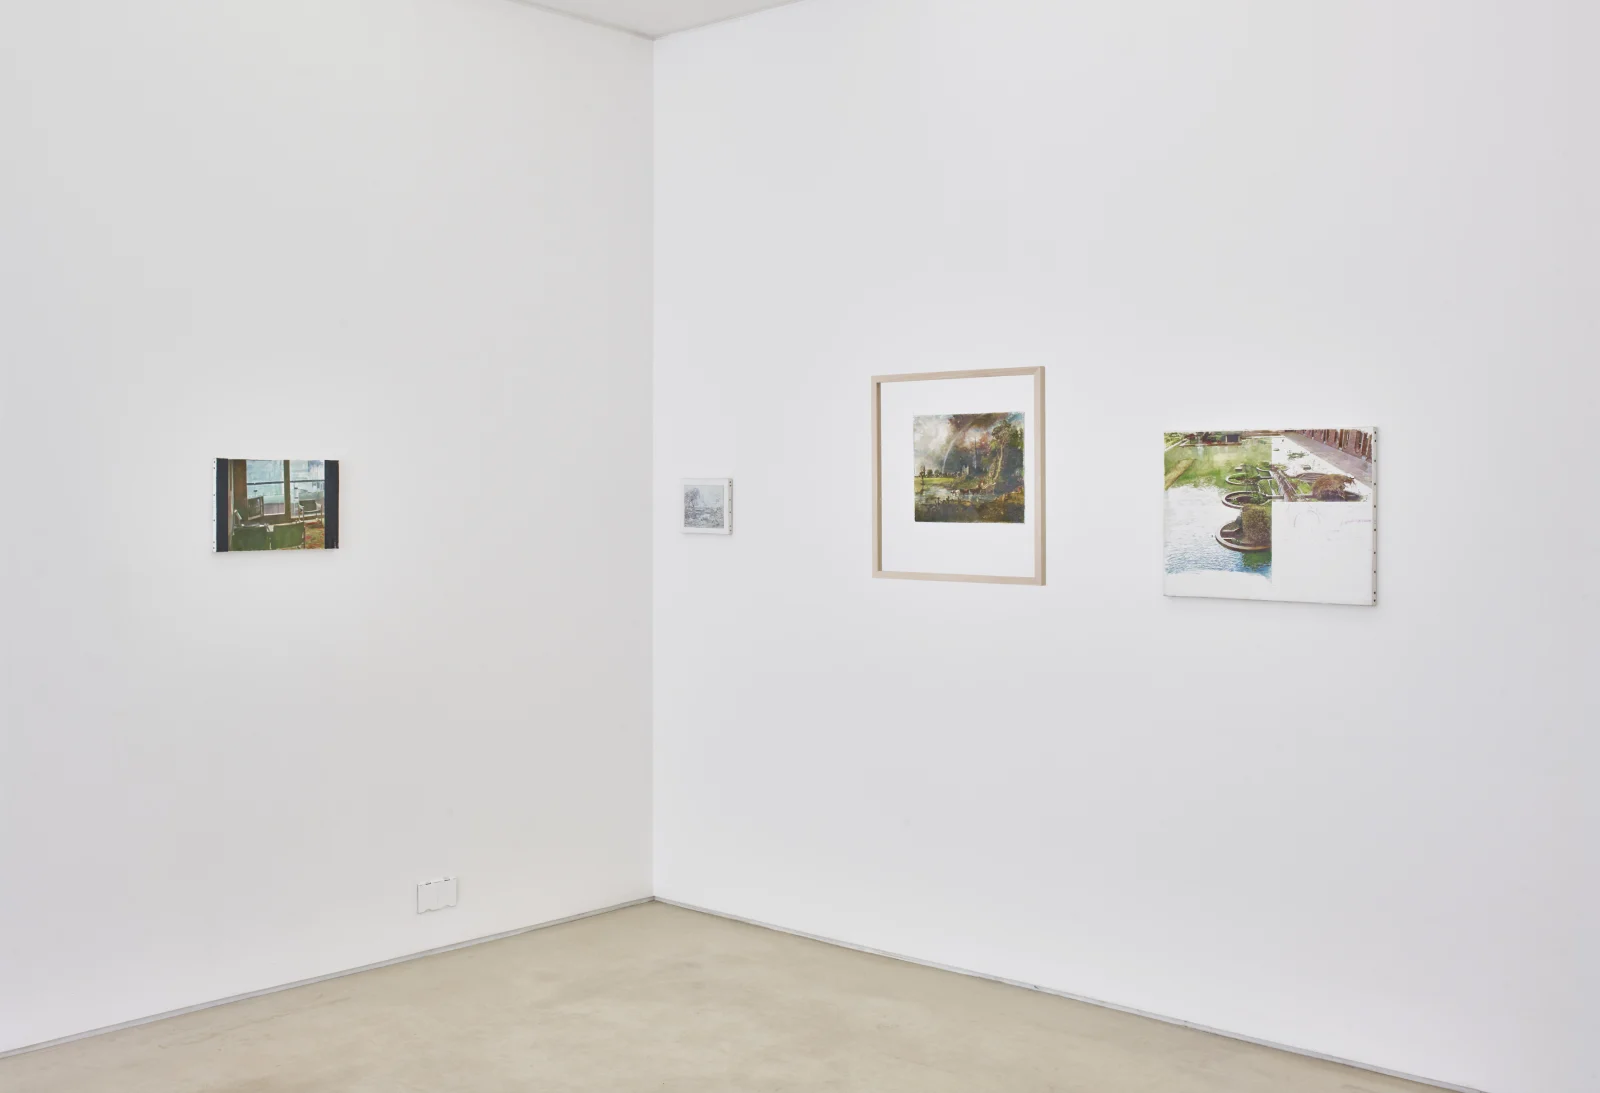 <div class="additional_caption">Juan Araujo, 'Measurable distances of space and air', PEER, London (2019)</div>